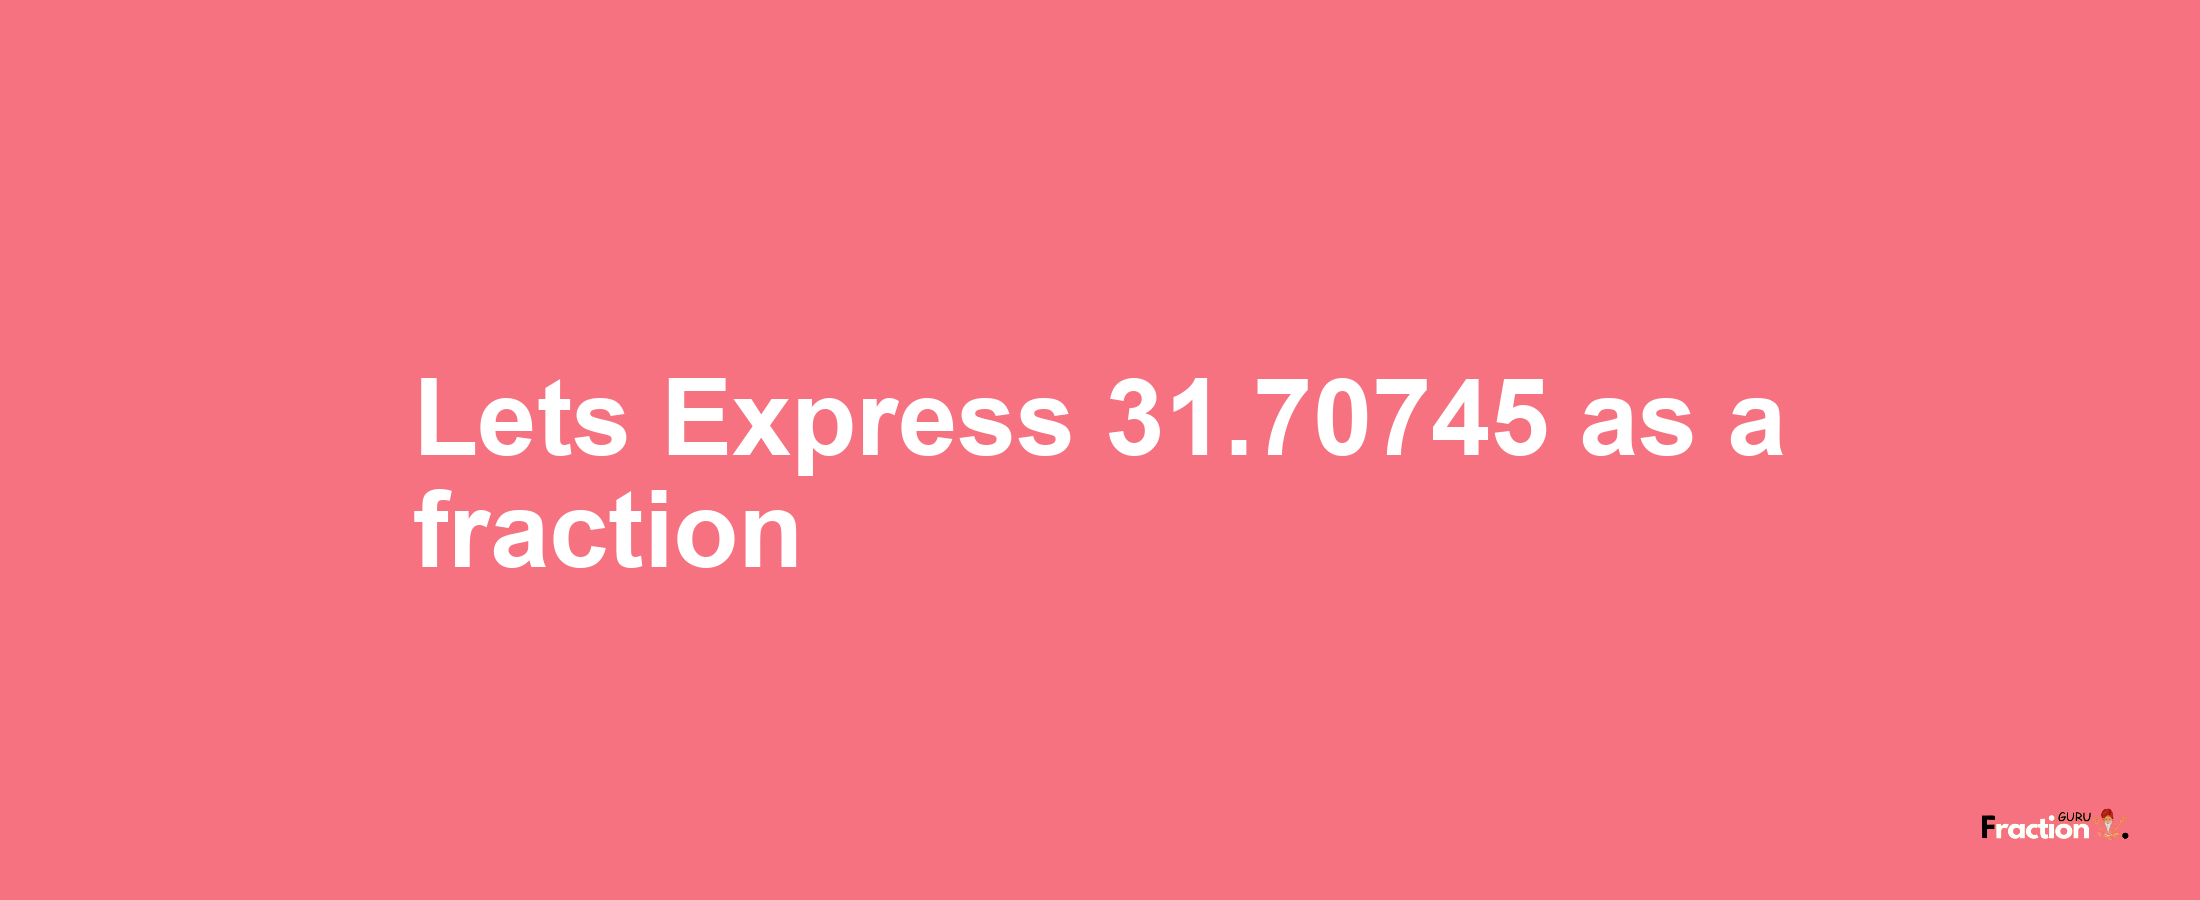 Lets Express 31.70745 as afraction